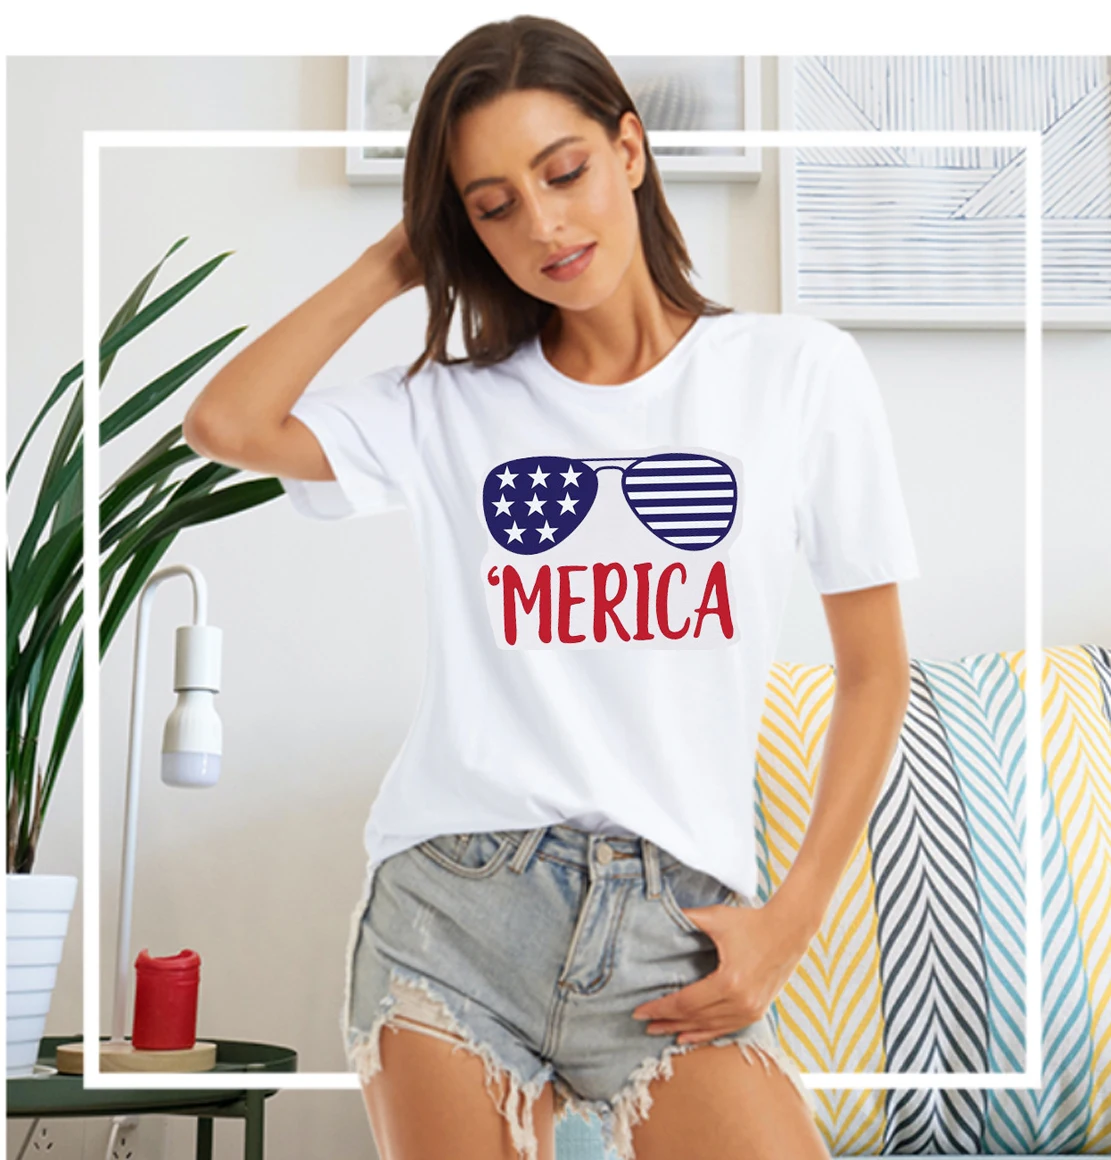 

YRYT New Summer Women's Top Merica American Flag Sunglasses Independence Day Print Short Sleeve T-shirt